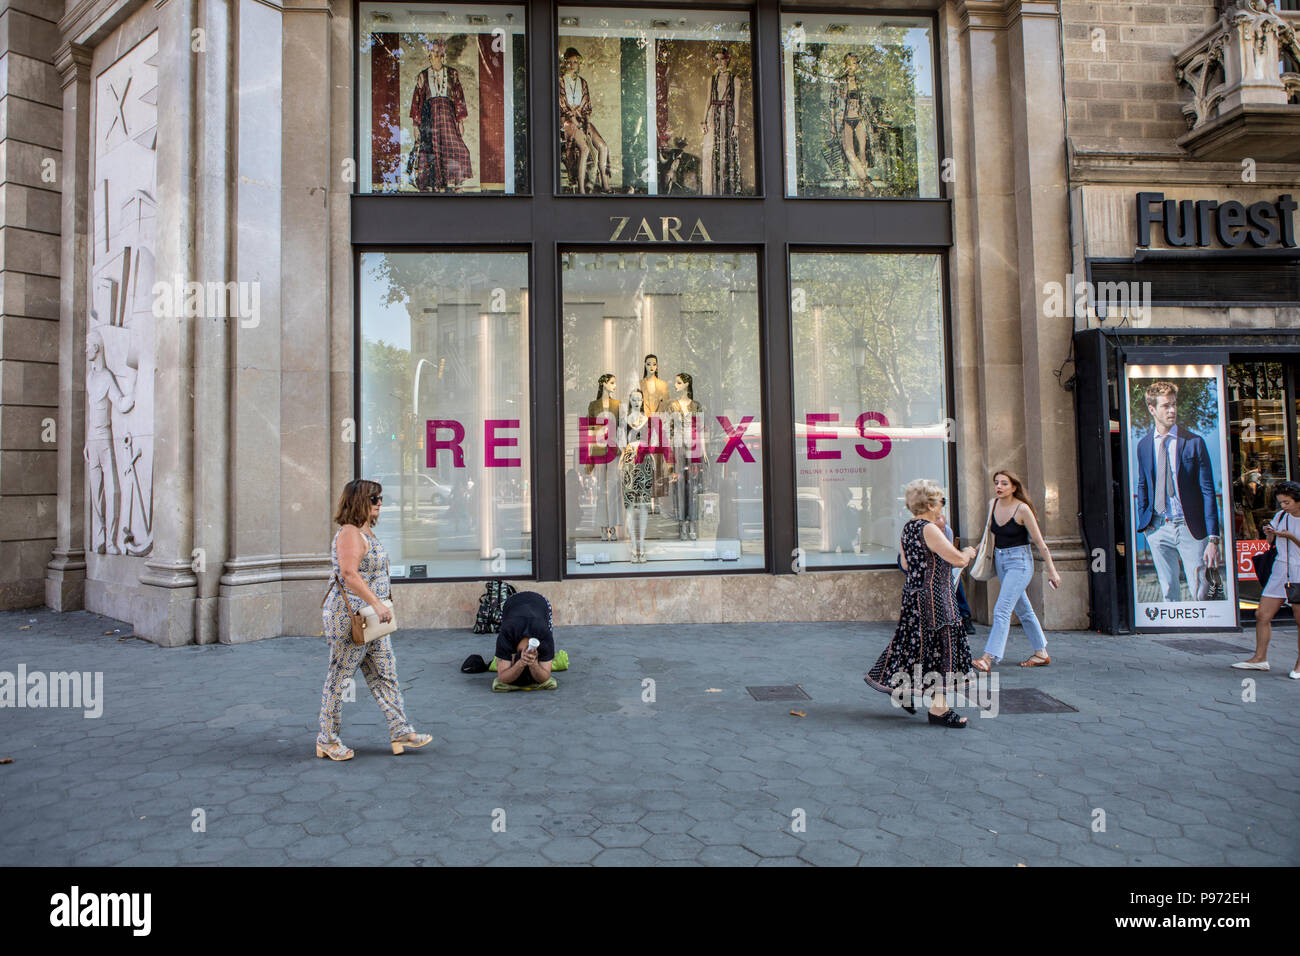 Zara store on Passeig de Gràcia street in Barcelona. Barcelona is a city in  Spain. It is the capital and largest city of Catalonia, as well as the  second most populous municipality